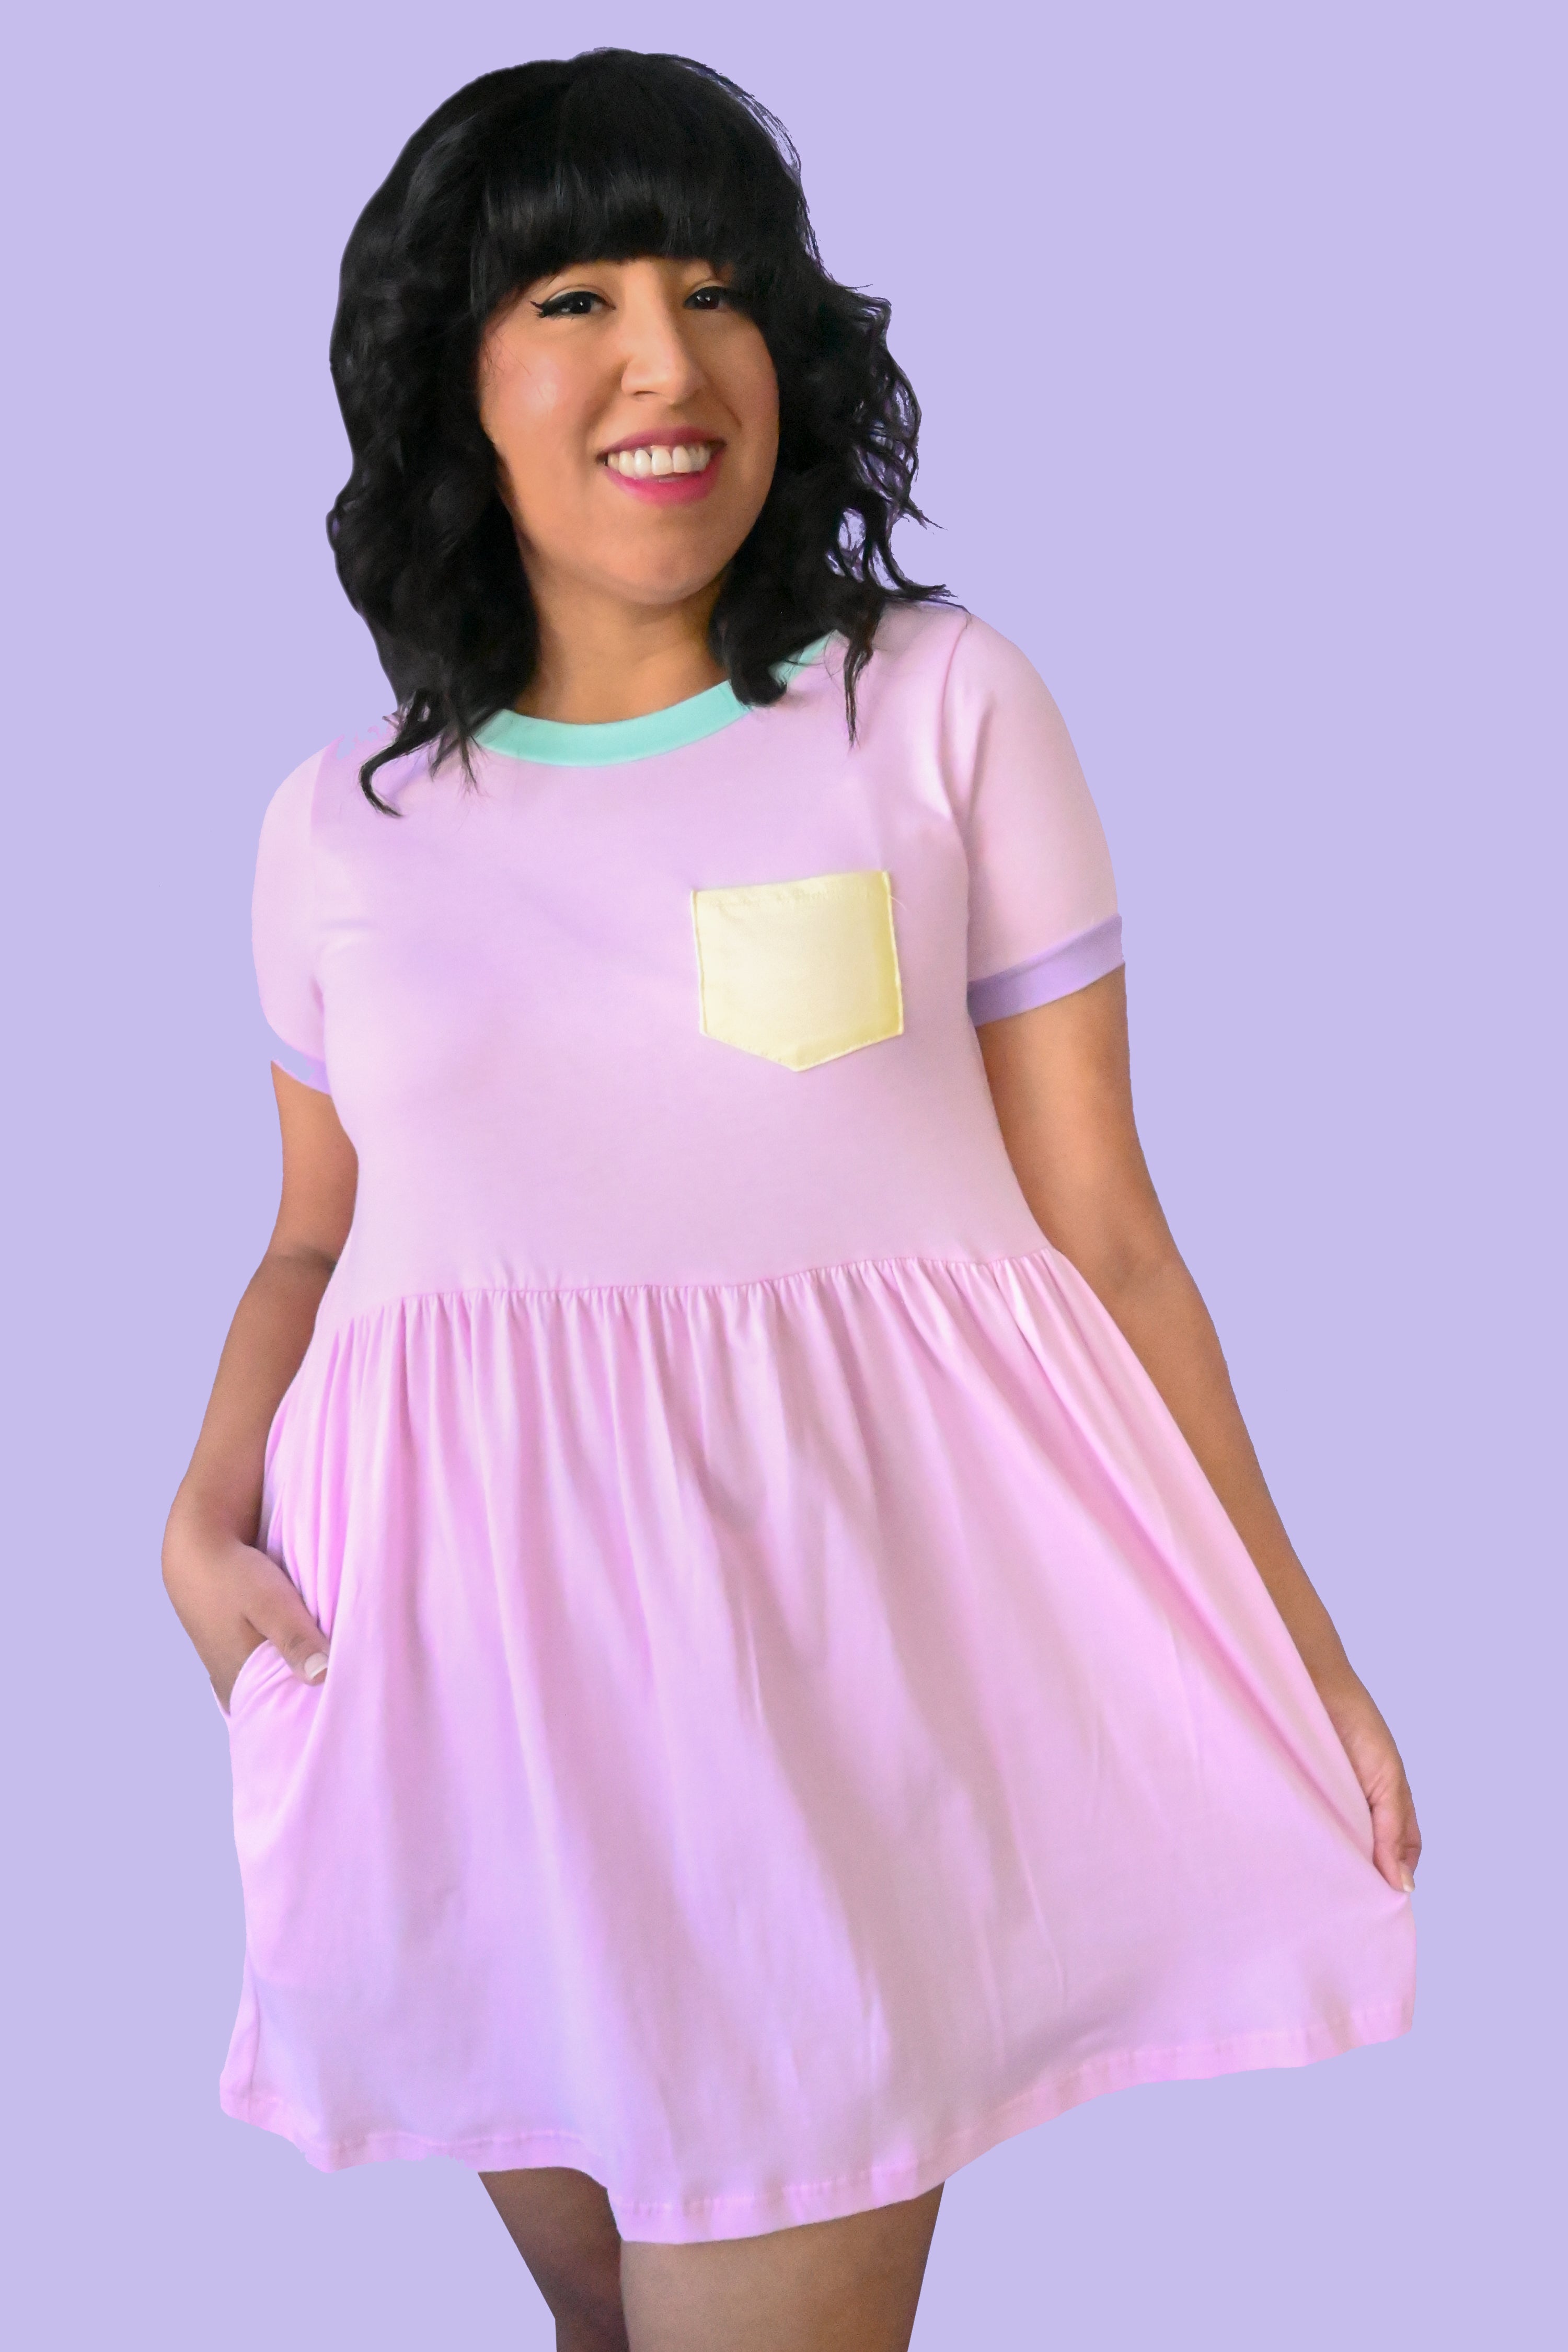 pink t shirt dress with mint collar, purple sleeve trim, and yellow lapel pocket